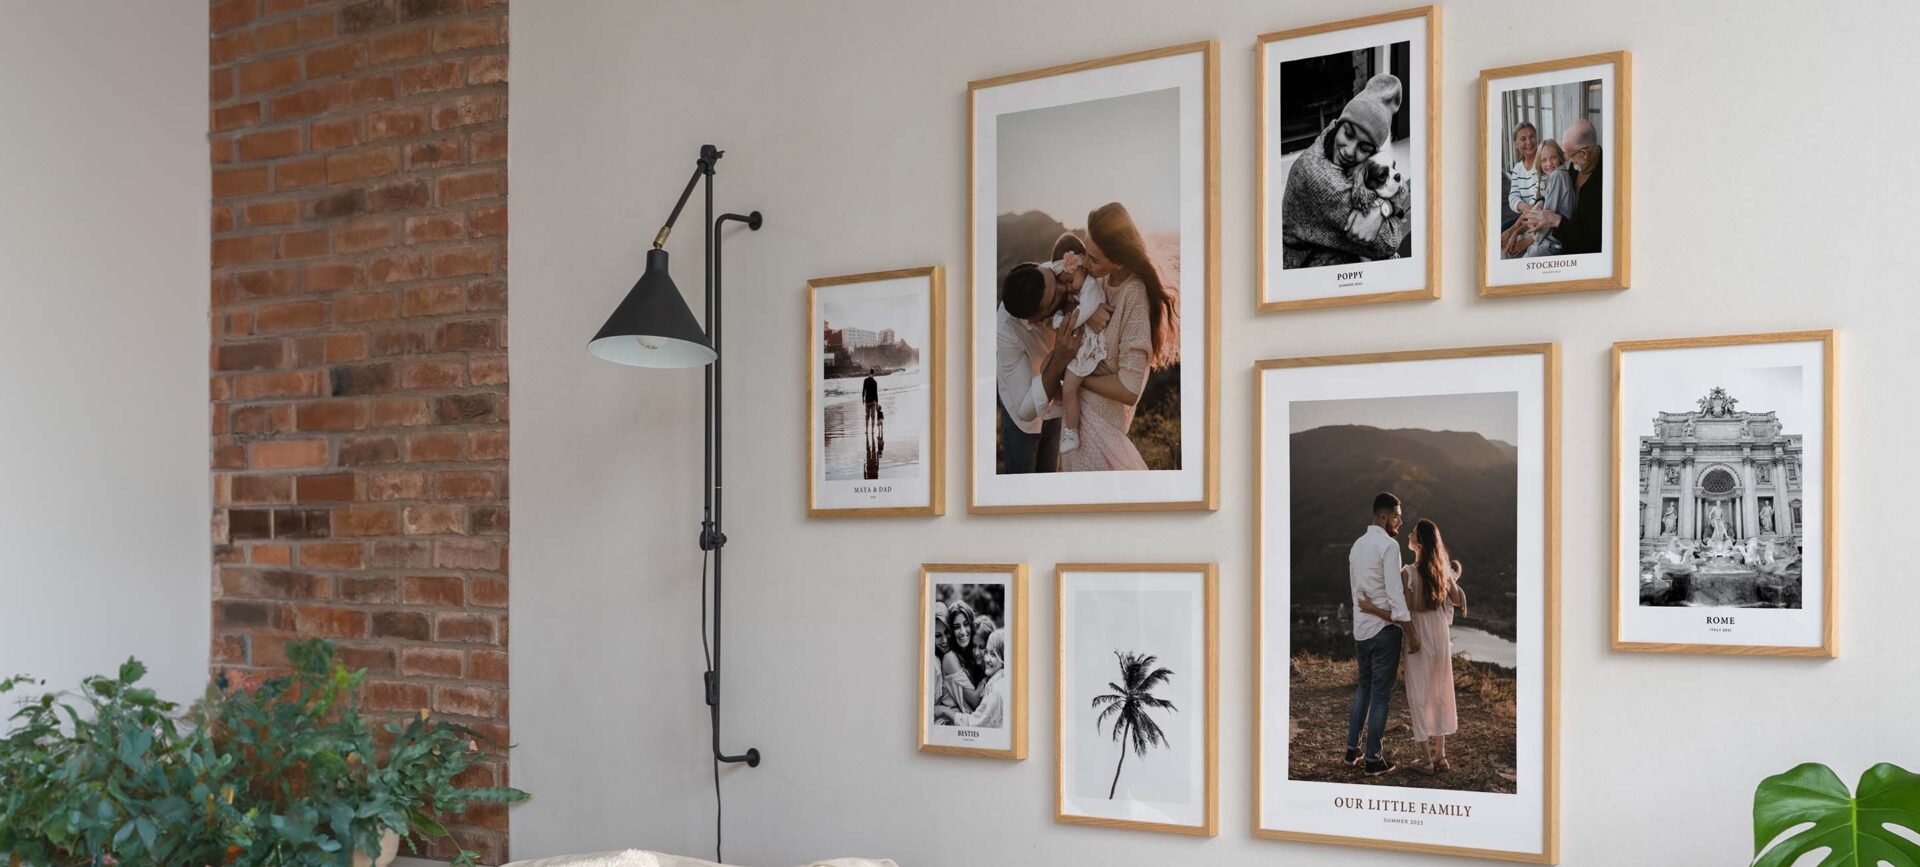 Personal gallery wall with photo posters of memories